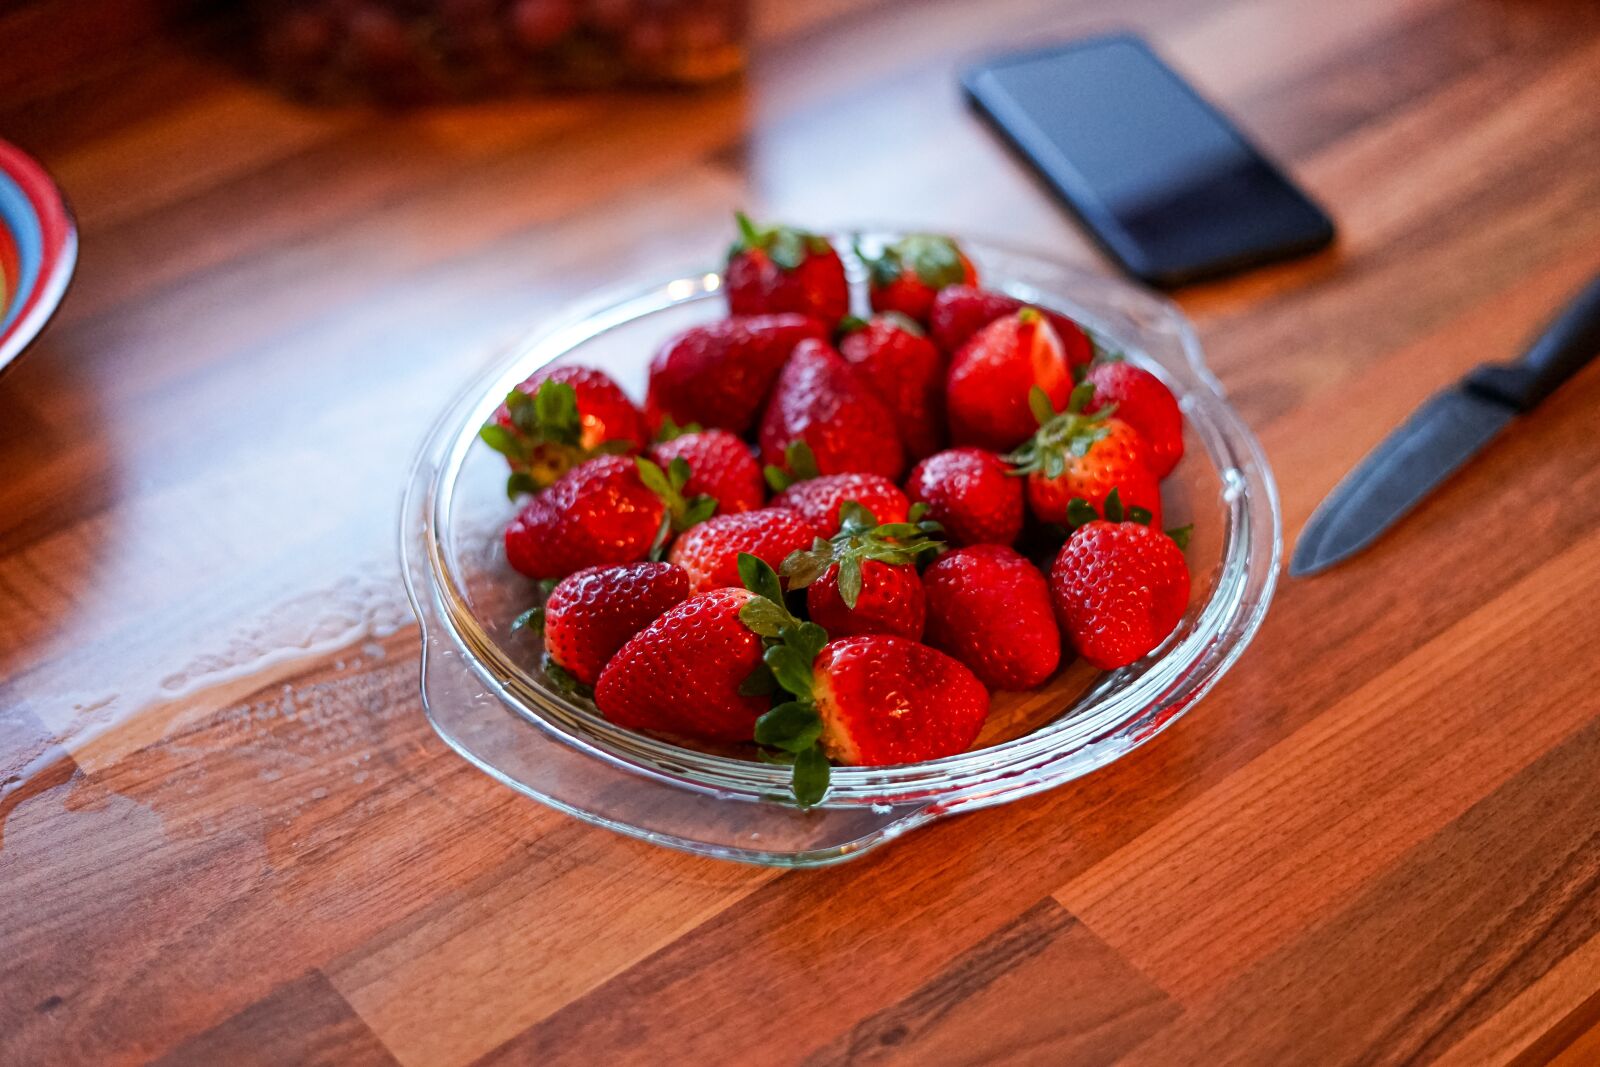 Sony a7 II sample photo. Strawberries, berries, fruit photography